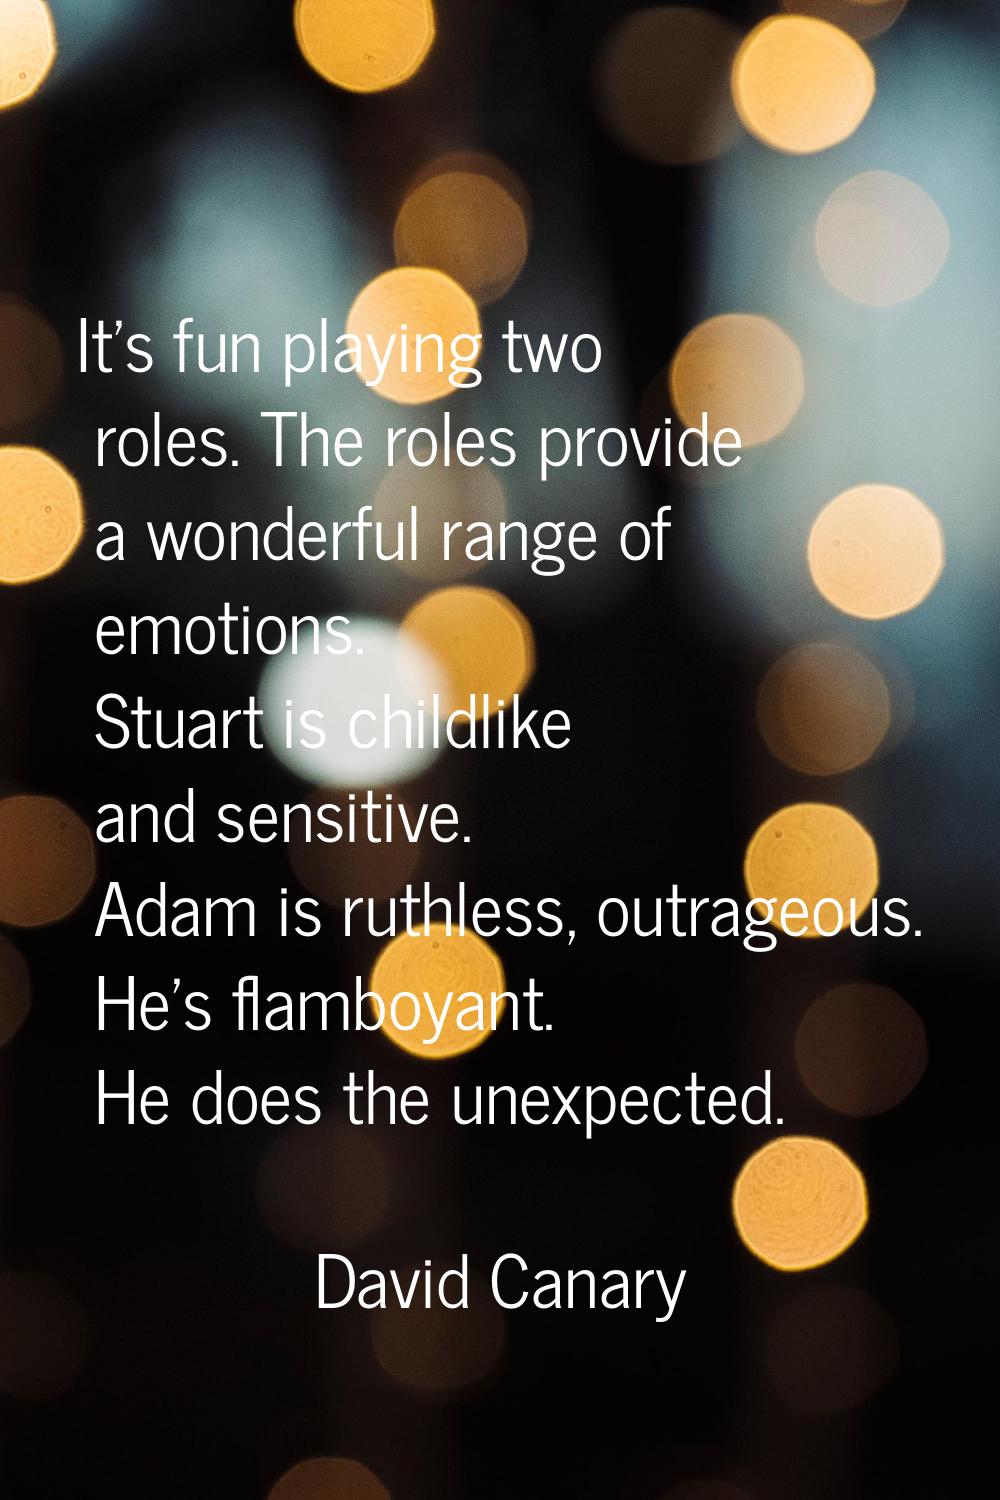 It's fun playing two roles. The roles provide a wonderful range of emotions. Stuart is childlike an